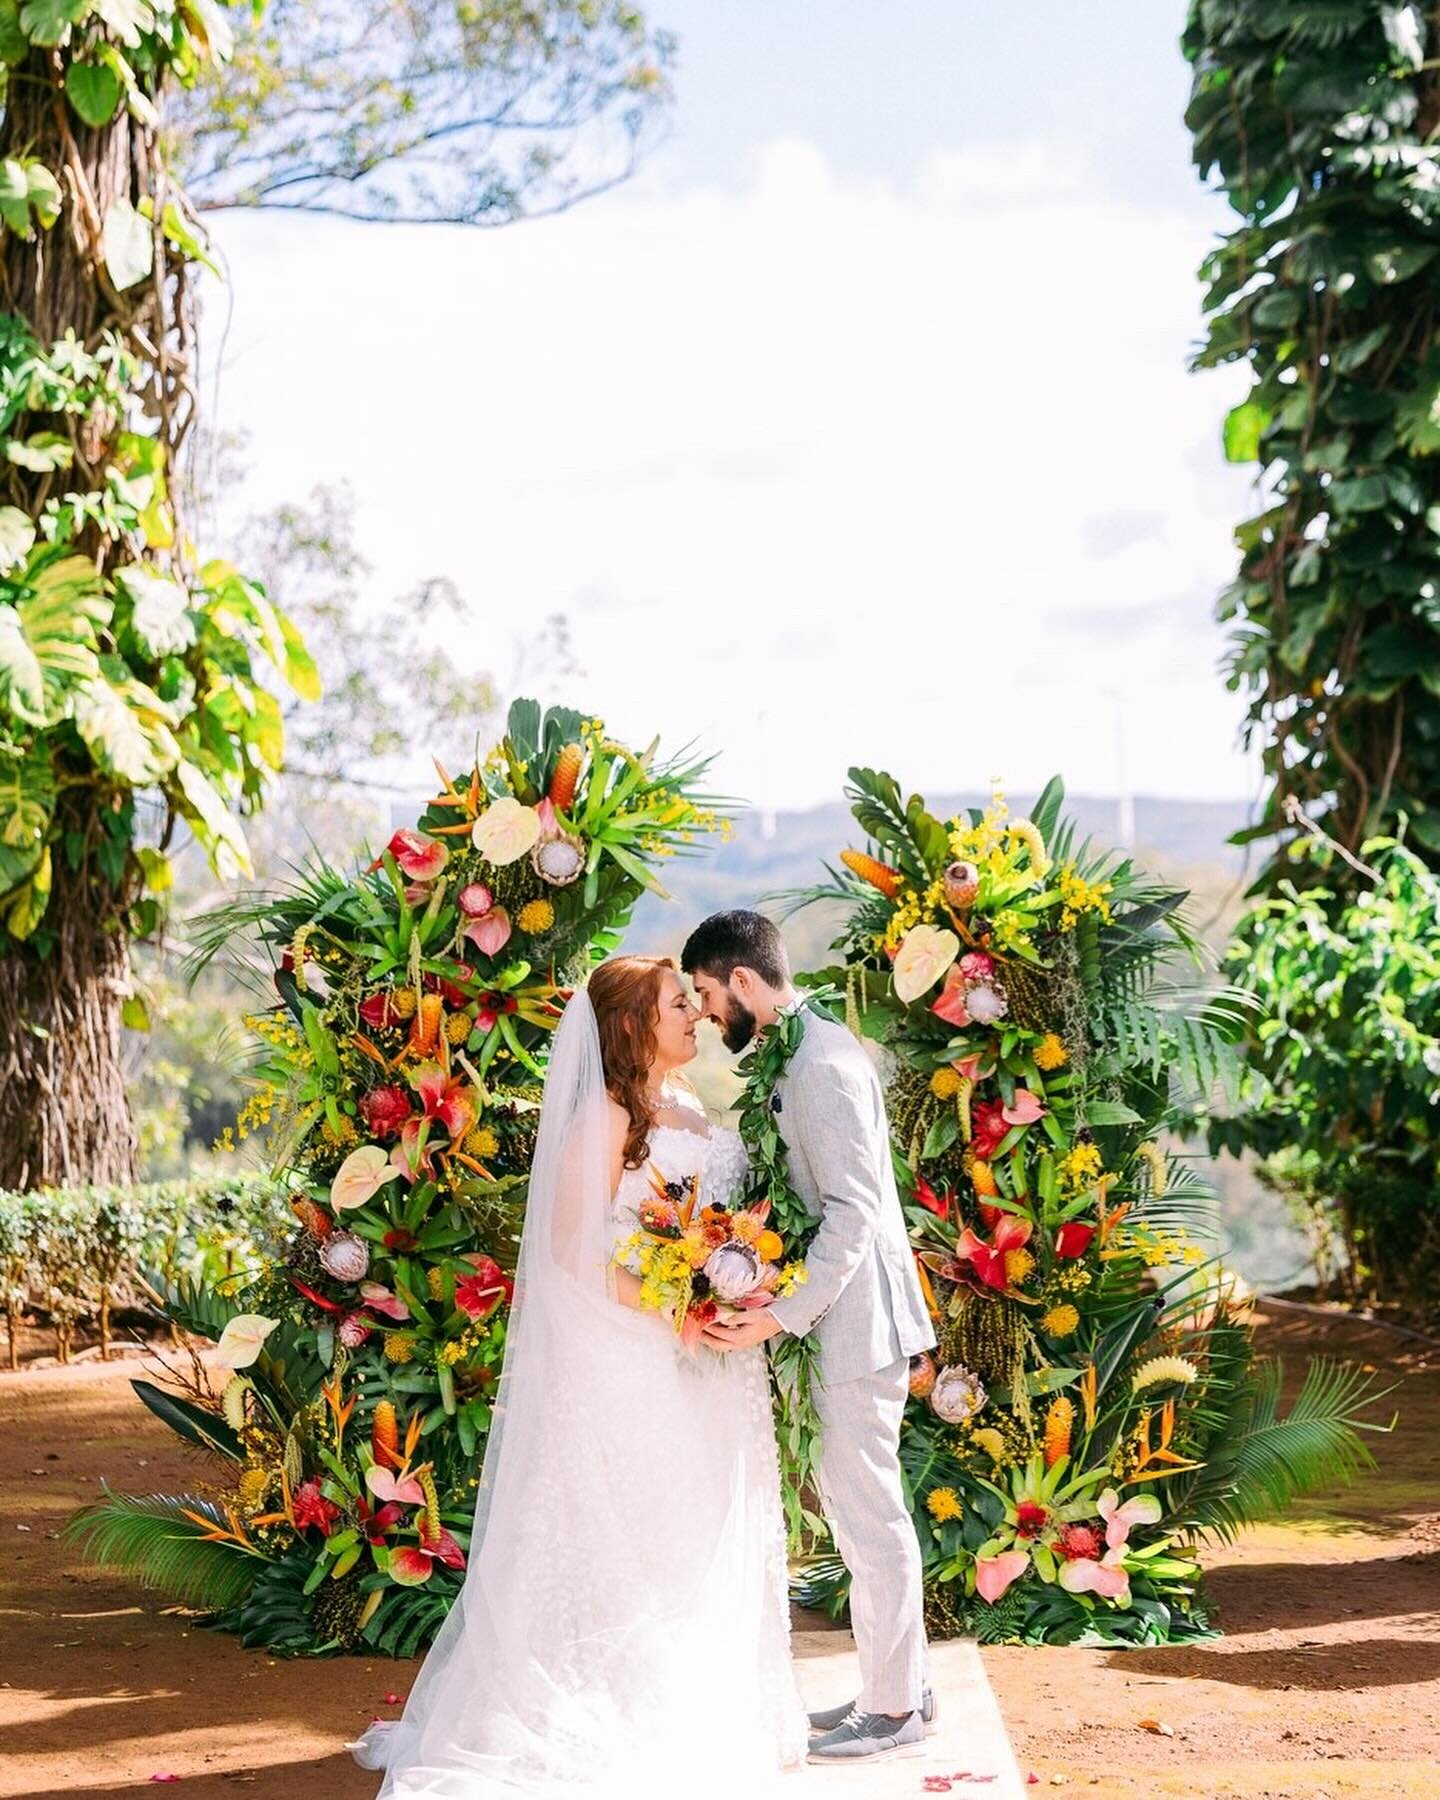 We&rsquo;re loving all of the warm, cheerful moments from this day! Congratulations Kayla &amp; Michael! Swipe right for more. 🧡
. 
Bride &amp; Groom @karmijo93 @musicfreek93
Venue &amp; Planning @sunsetranchhawaii 
Wedding Dress @lilibridals 
Flora